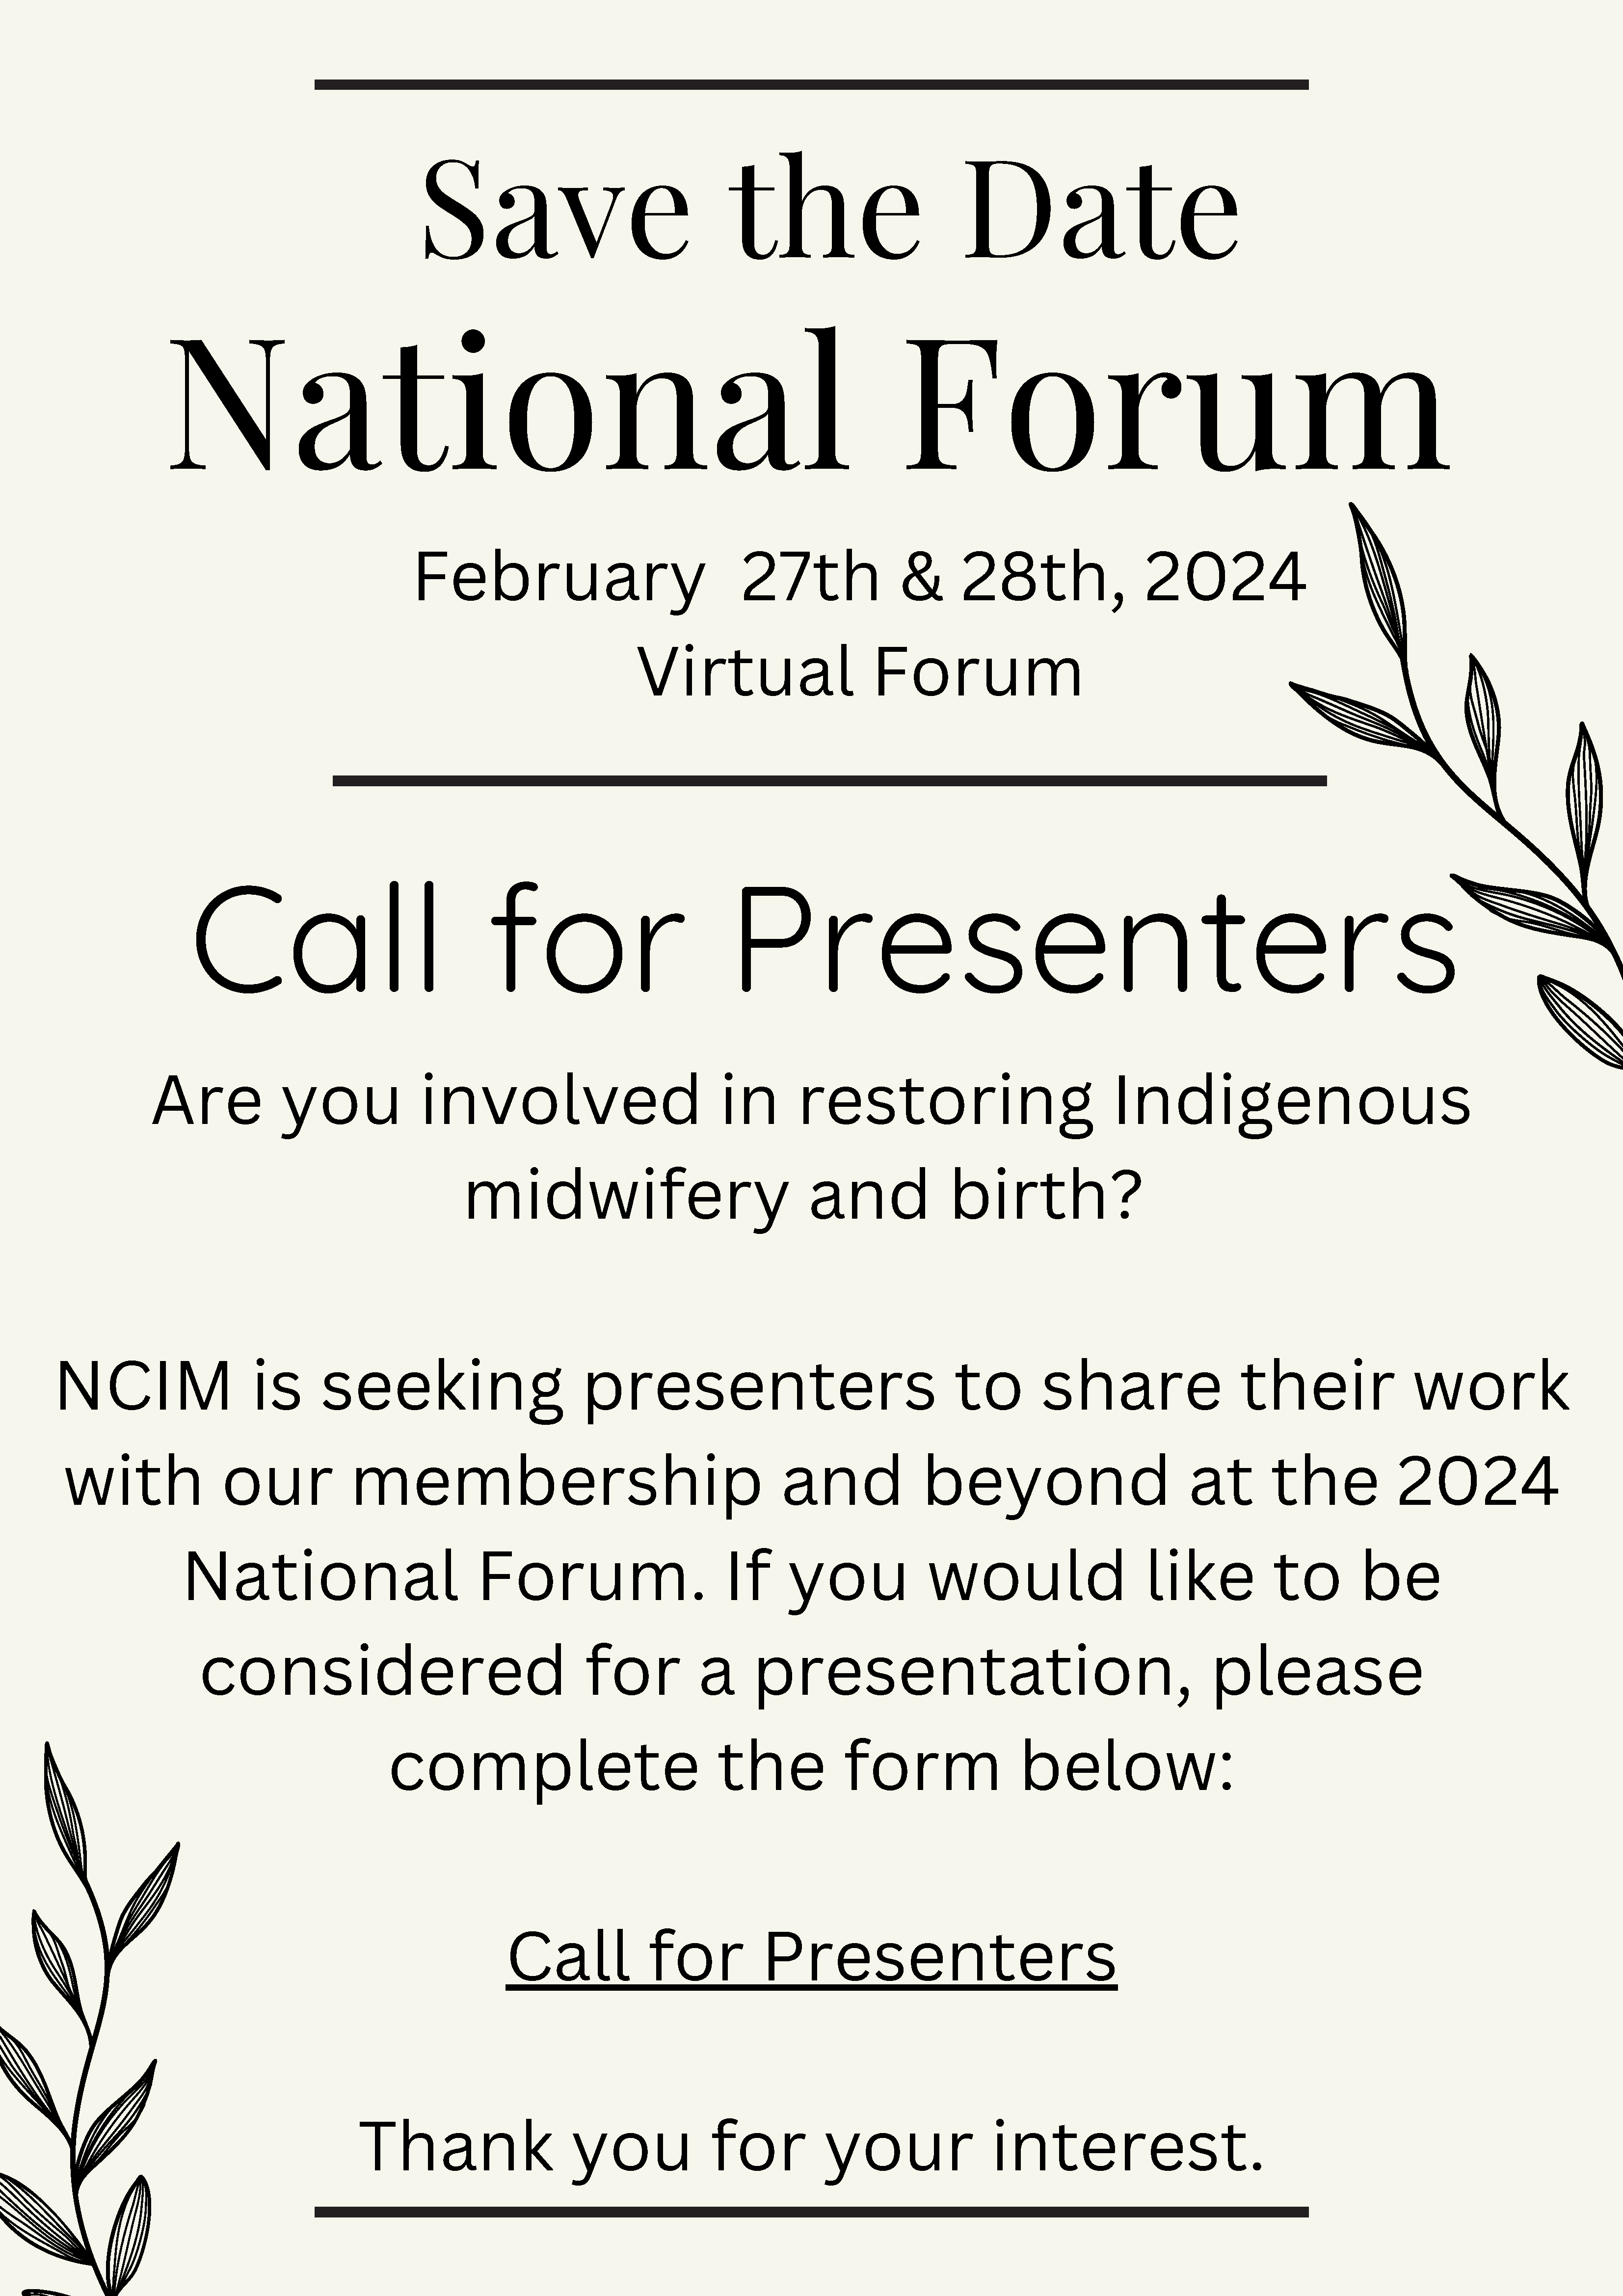 Tan background with line drawings of plants and text: National Forum February 27th & 28th, 2024 Virtual Forum Call for Presenters Are you involved in restoring Indigenous midwifery and birth? NCIM is seeking presenters to share their work with our membership and beyond at the 2024 National Forum. If you would like to b be considered for a presentation, please complete the form below: Call for Presenters Link Thank you for your interest.